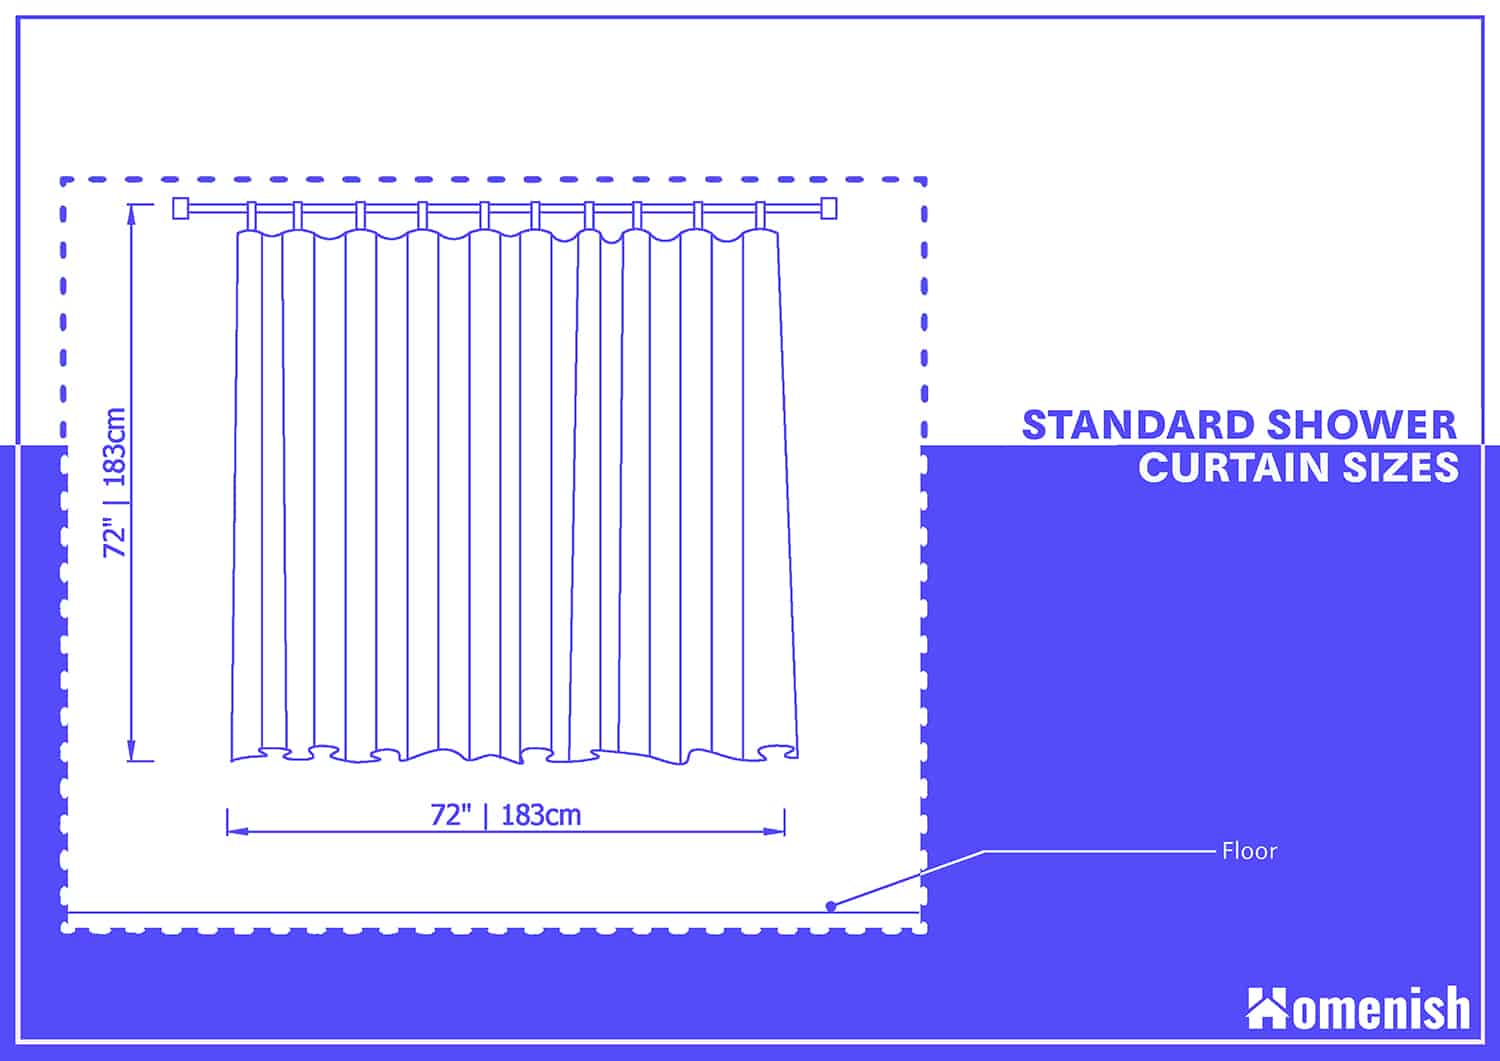 Standard Shower Curtain Size, What Are Standard Sizes For Shower Curtains